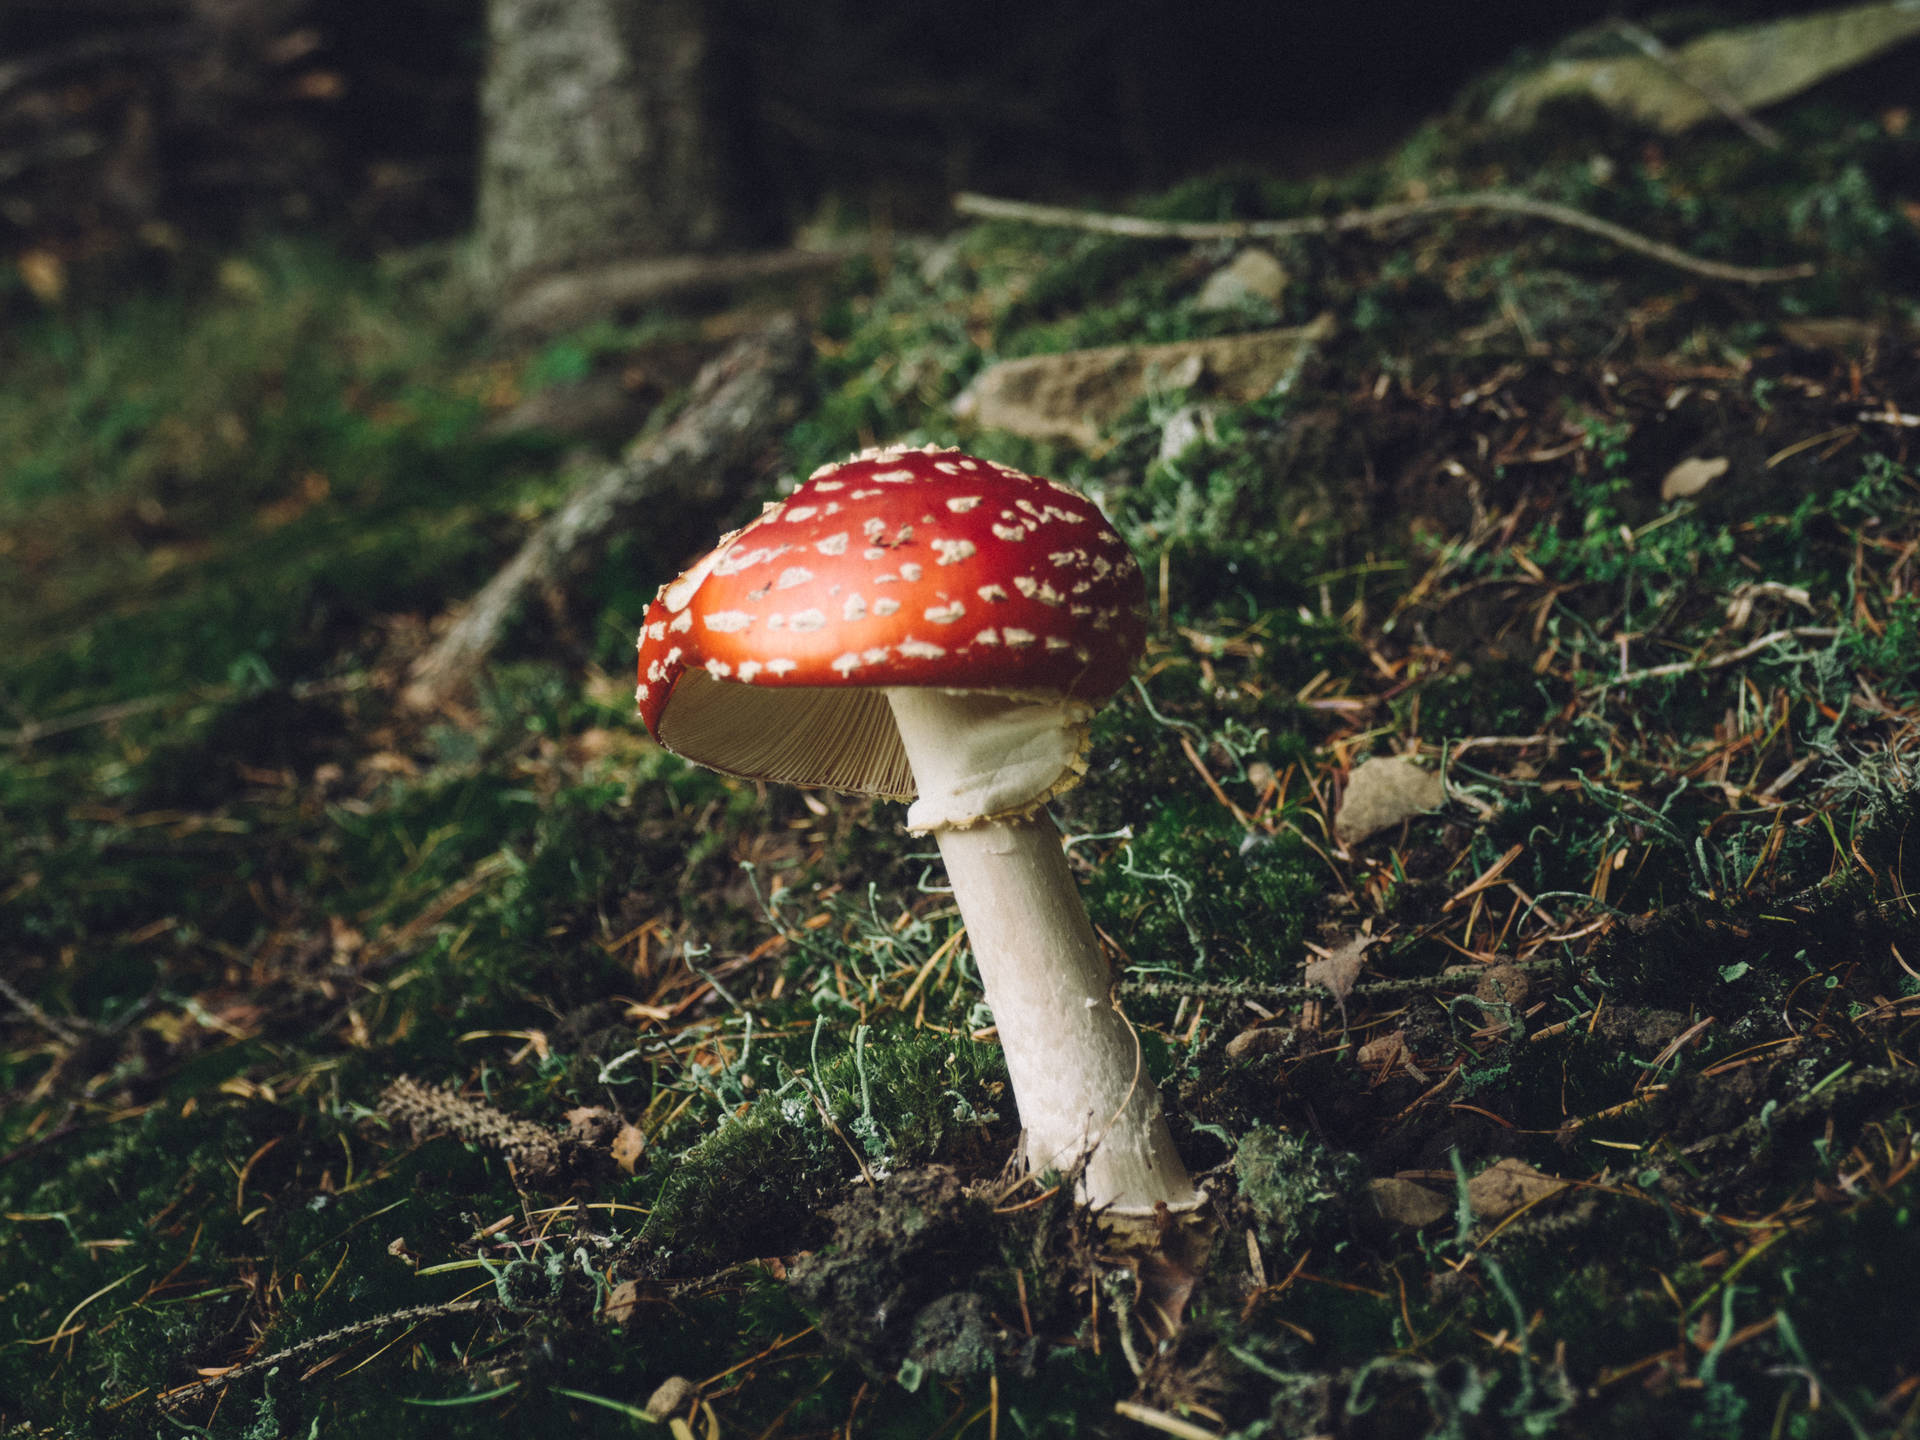 Cute Red Mushroom With Tall Stalk In Forest Background